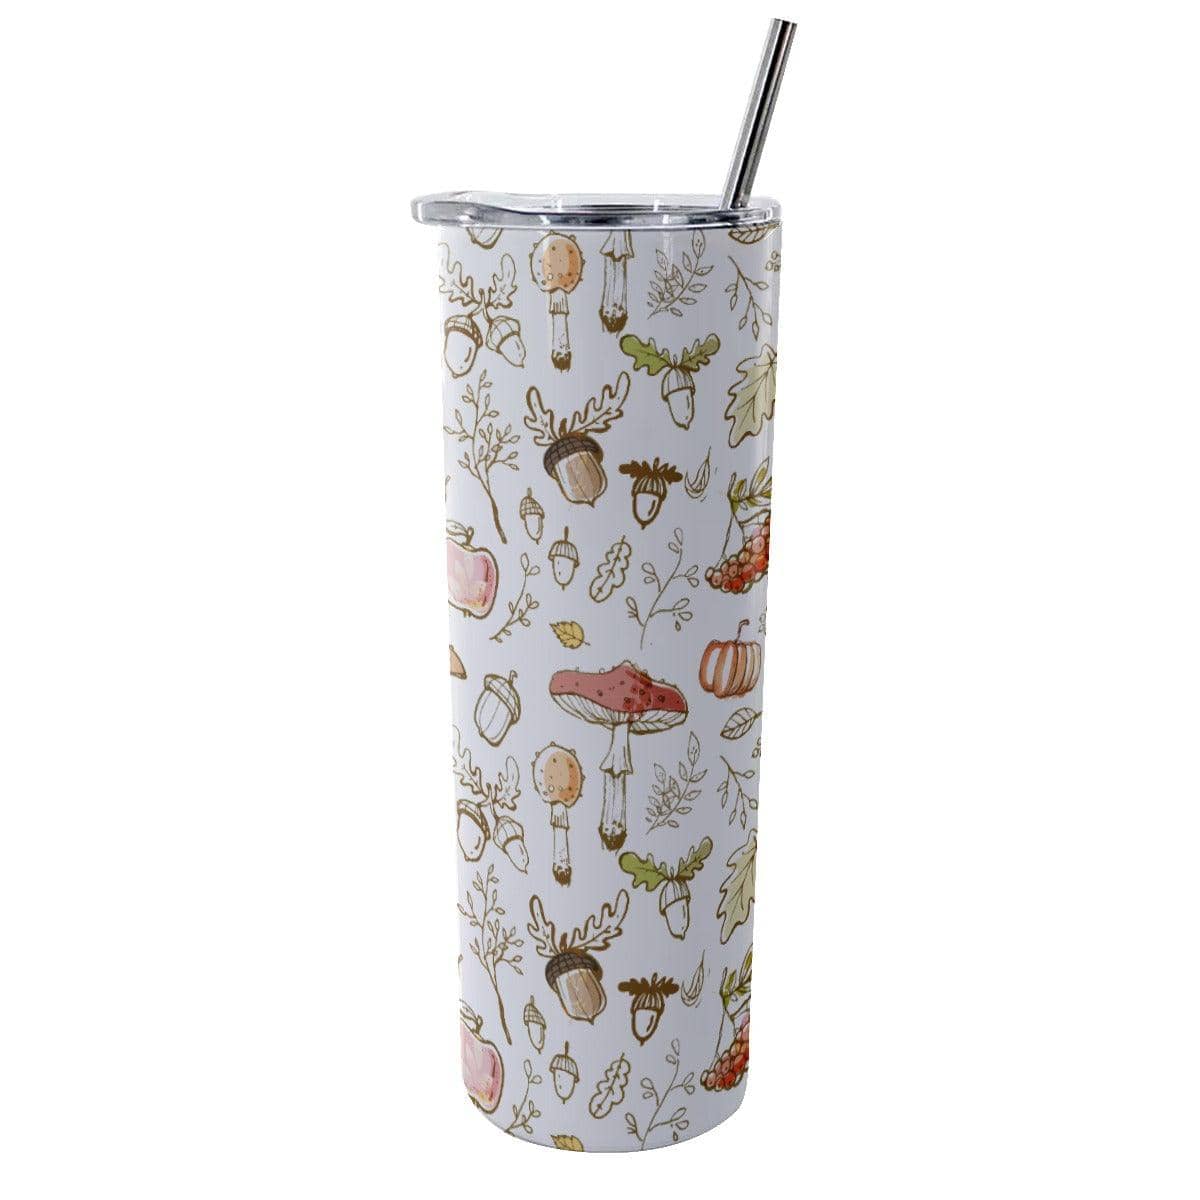 Loves Fruits Tumbler With Stainless Steel Straw 20oz - Thumbedtreats